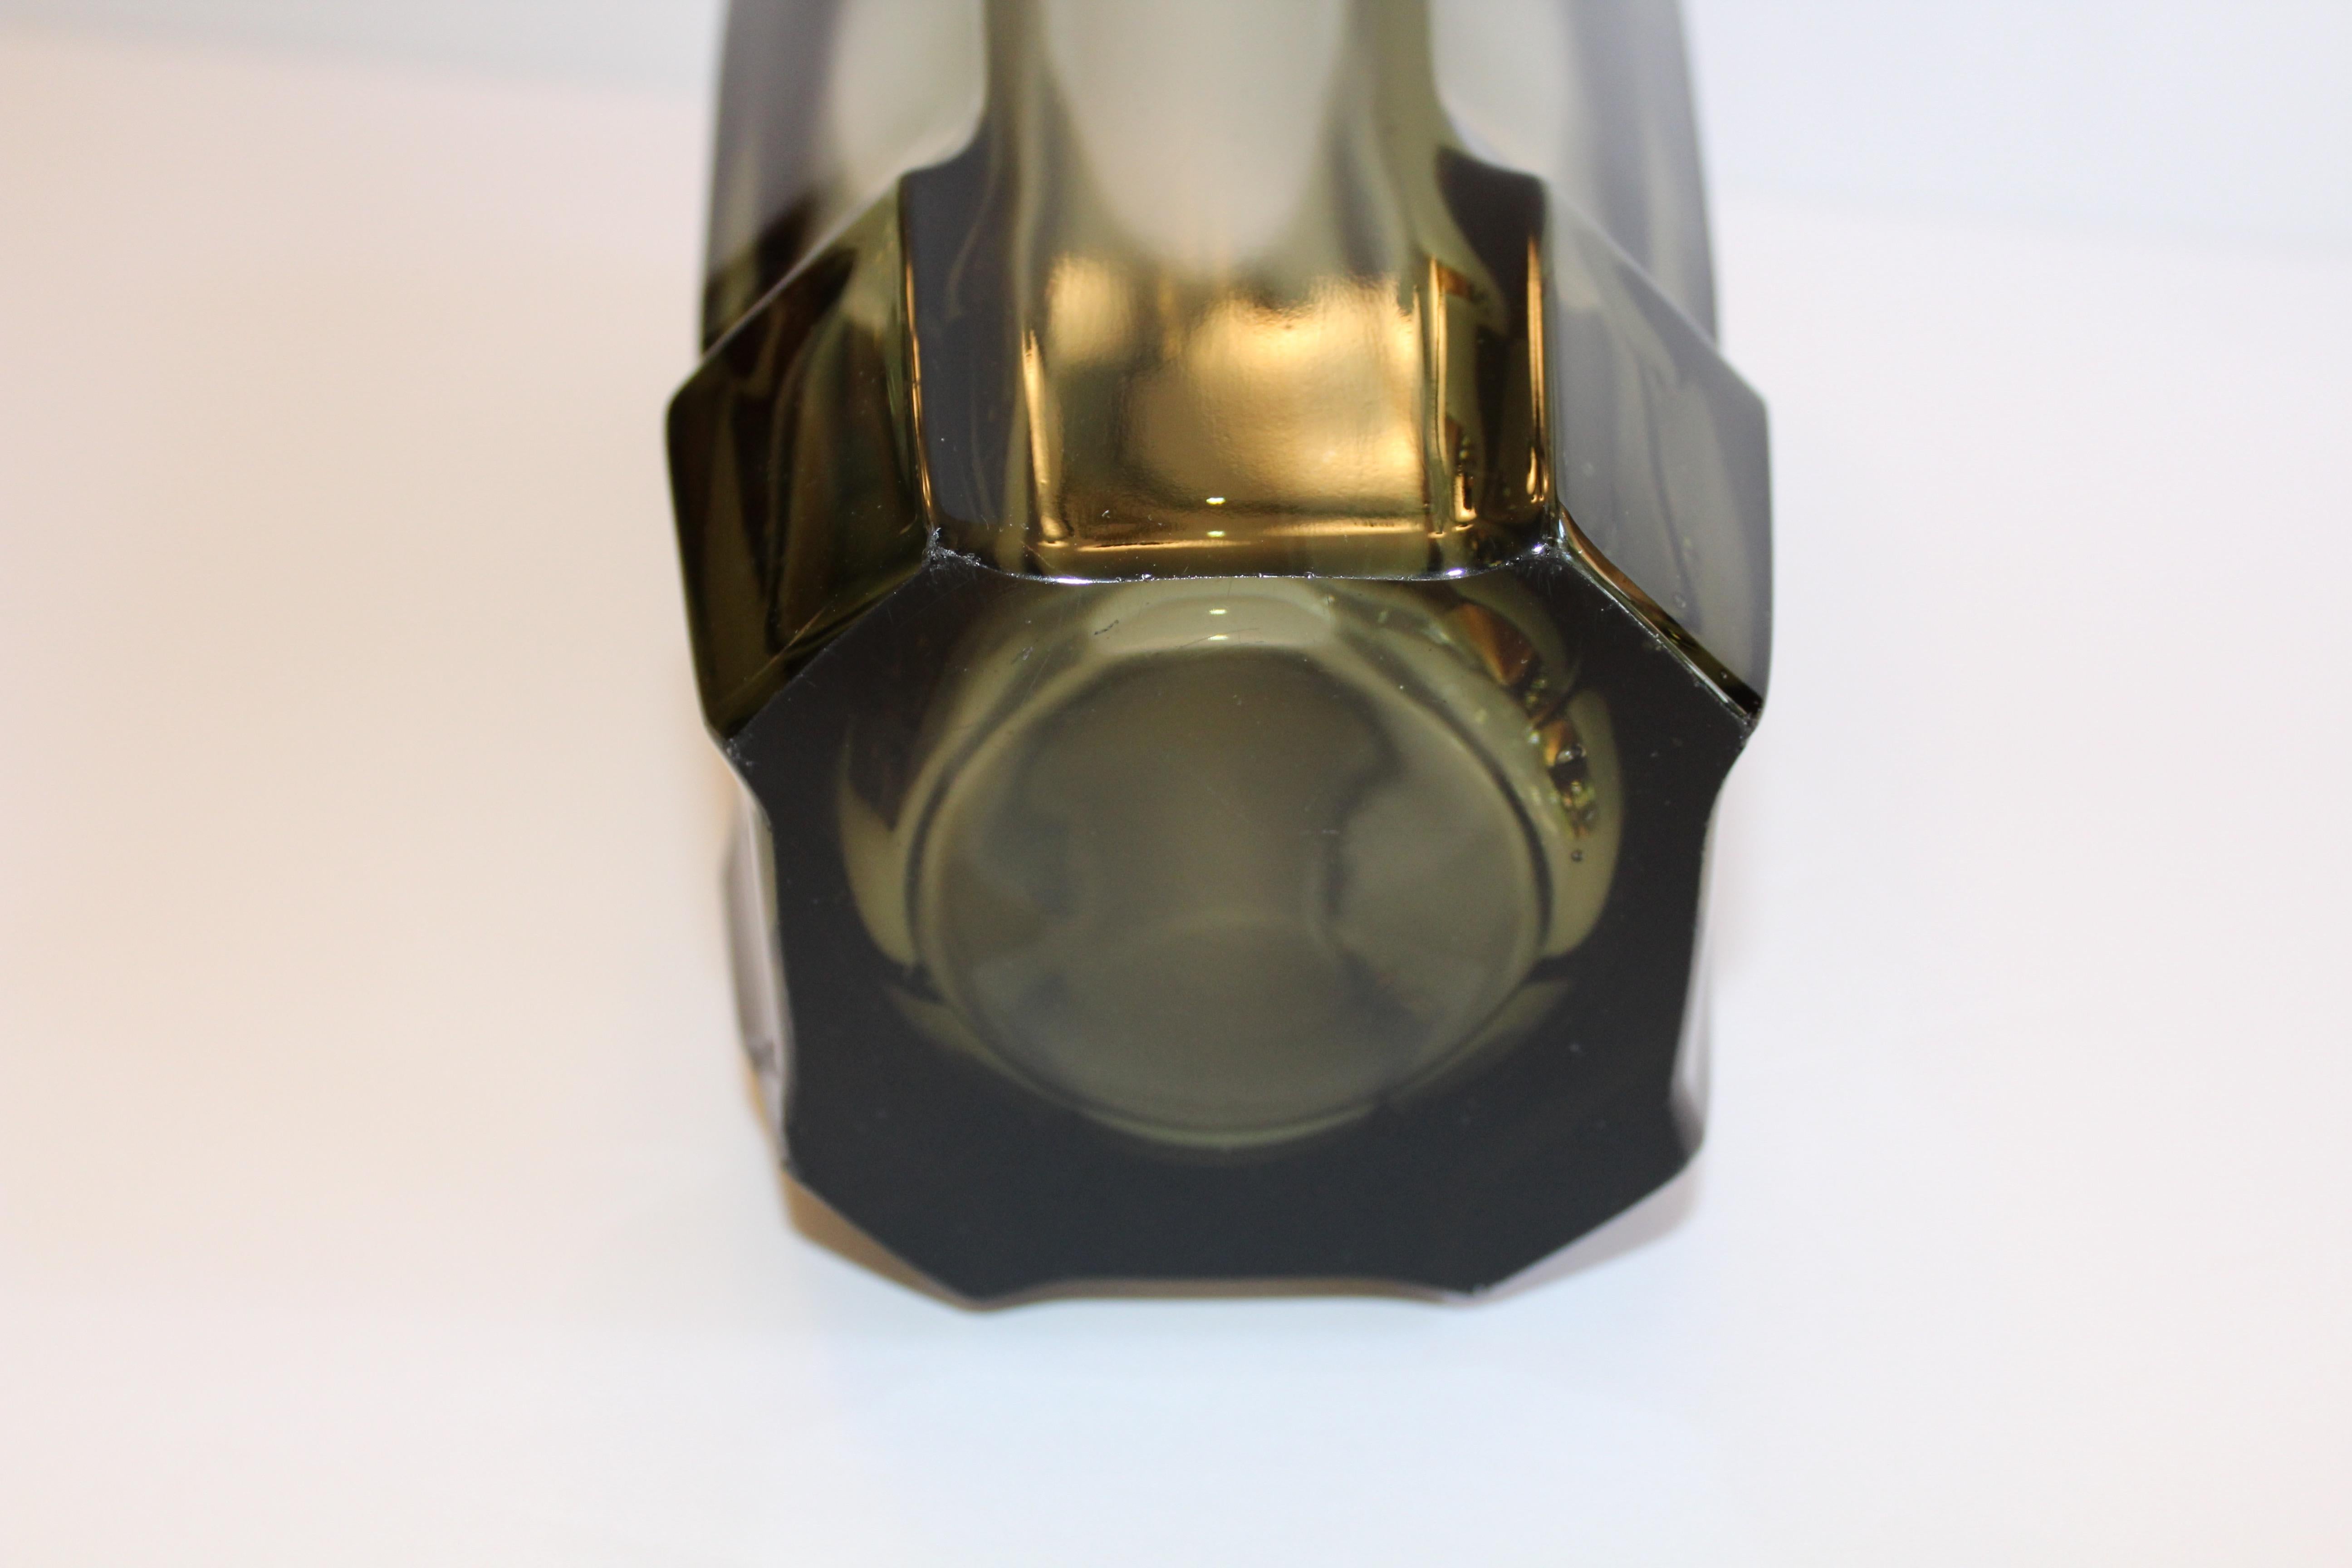 Art Deco Faceted Black Glass Vase In The Style Of Moser For Sale At 1stdibs Art Deco Glass